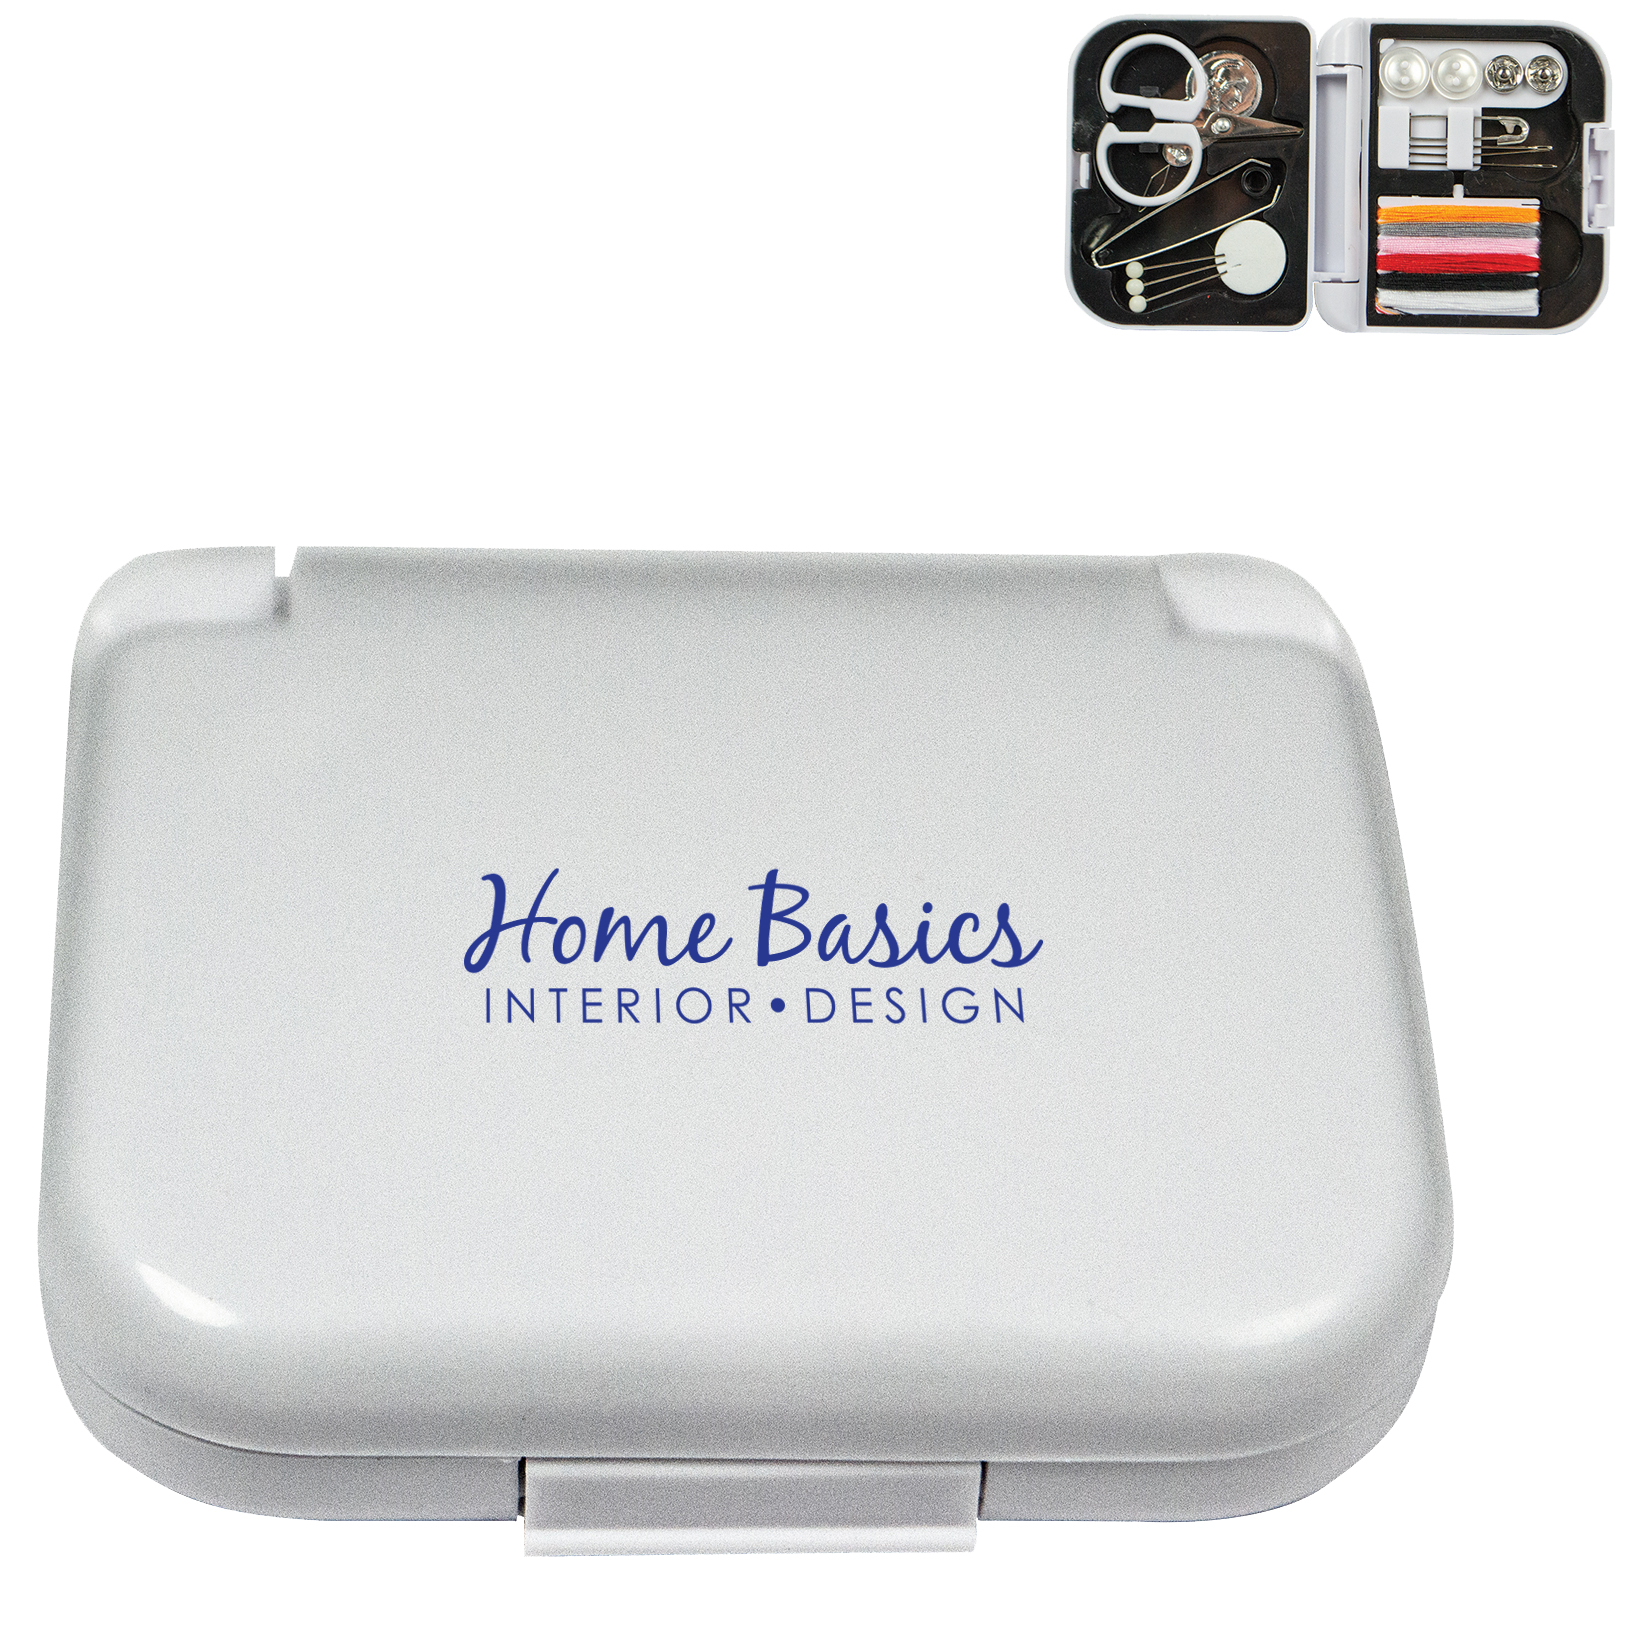 Promotional Travel Sewing Kit